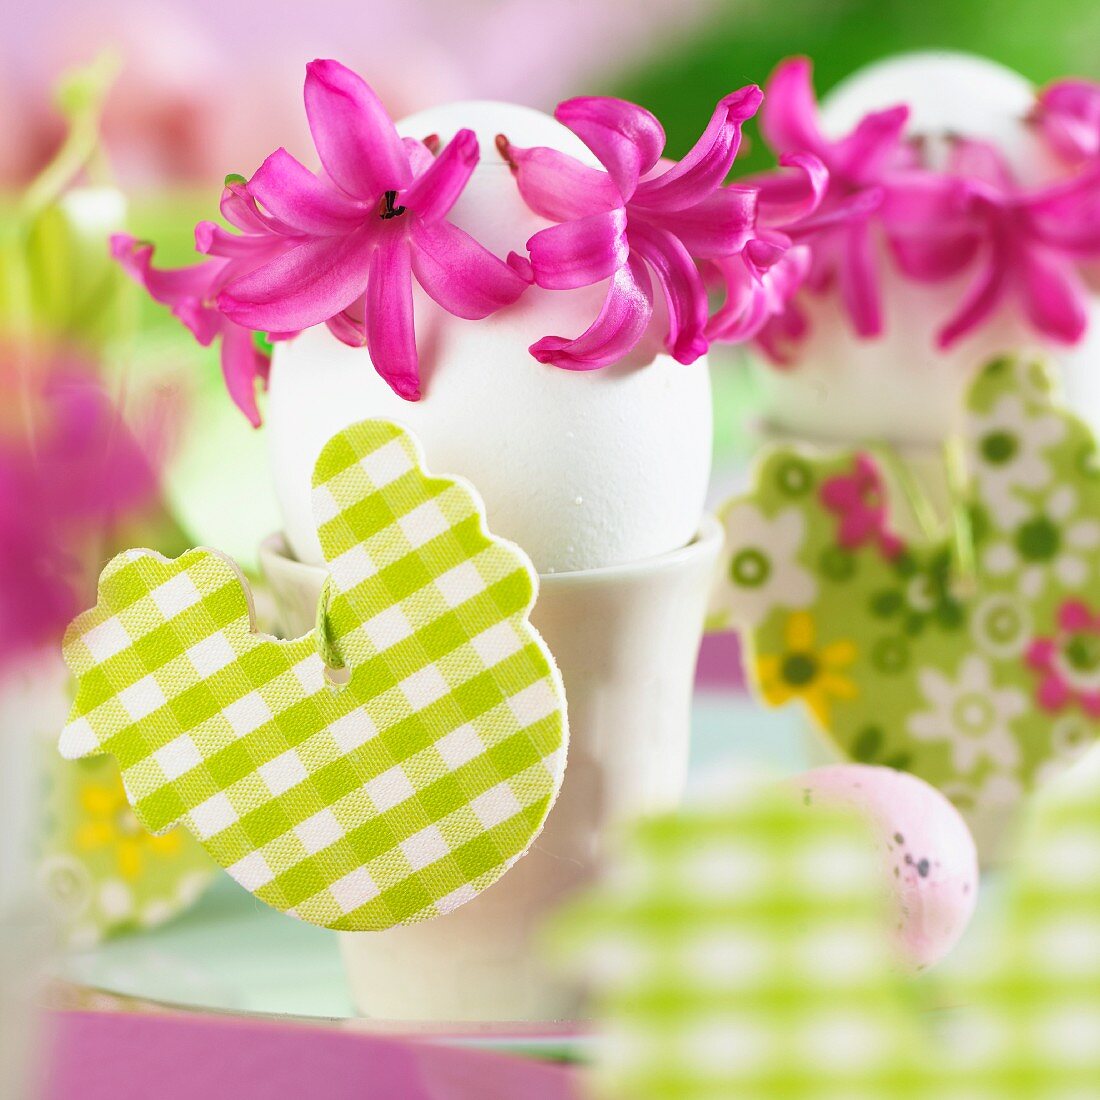 Eggs in egg cups decorated with hyacinth flowers